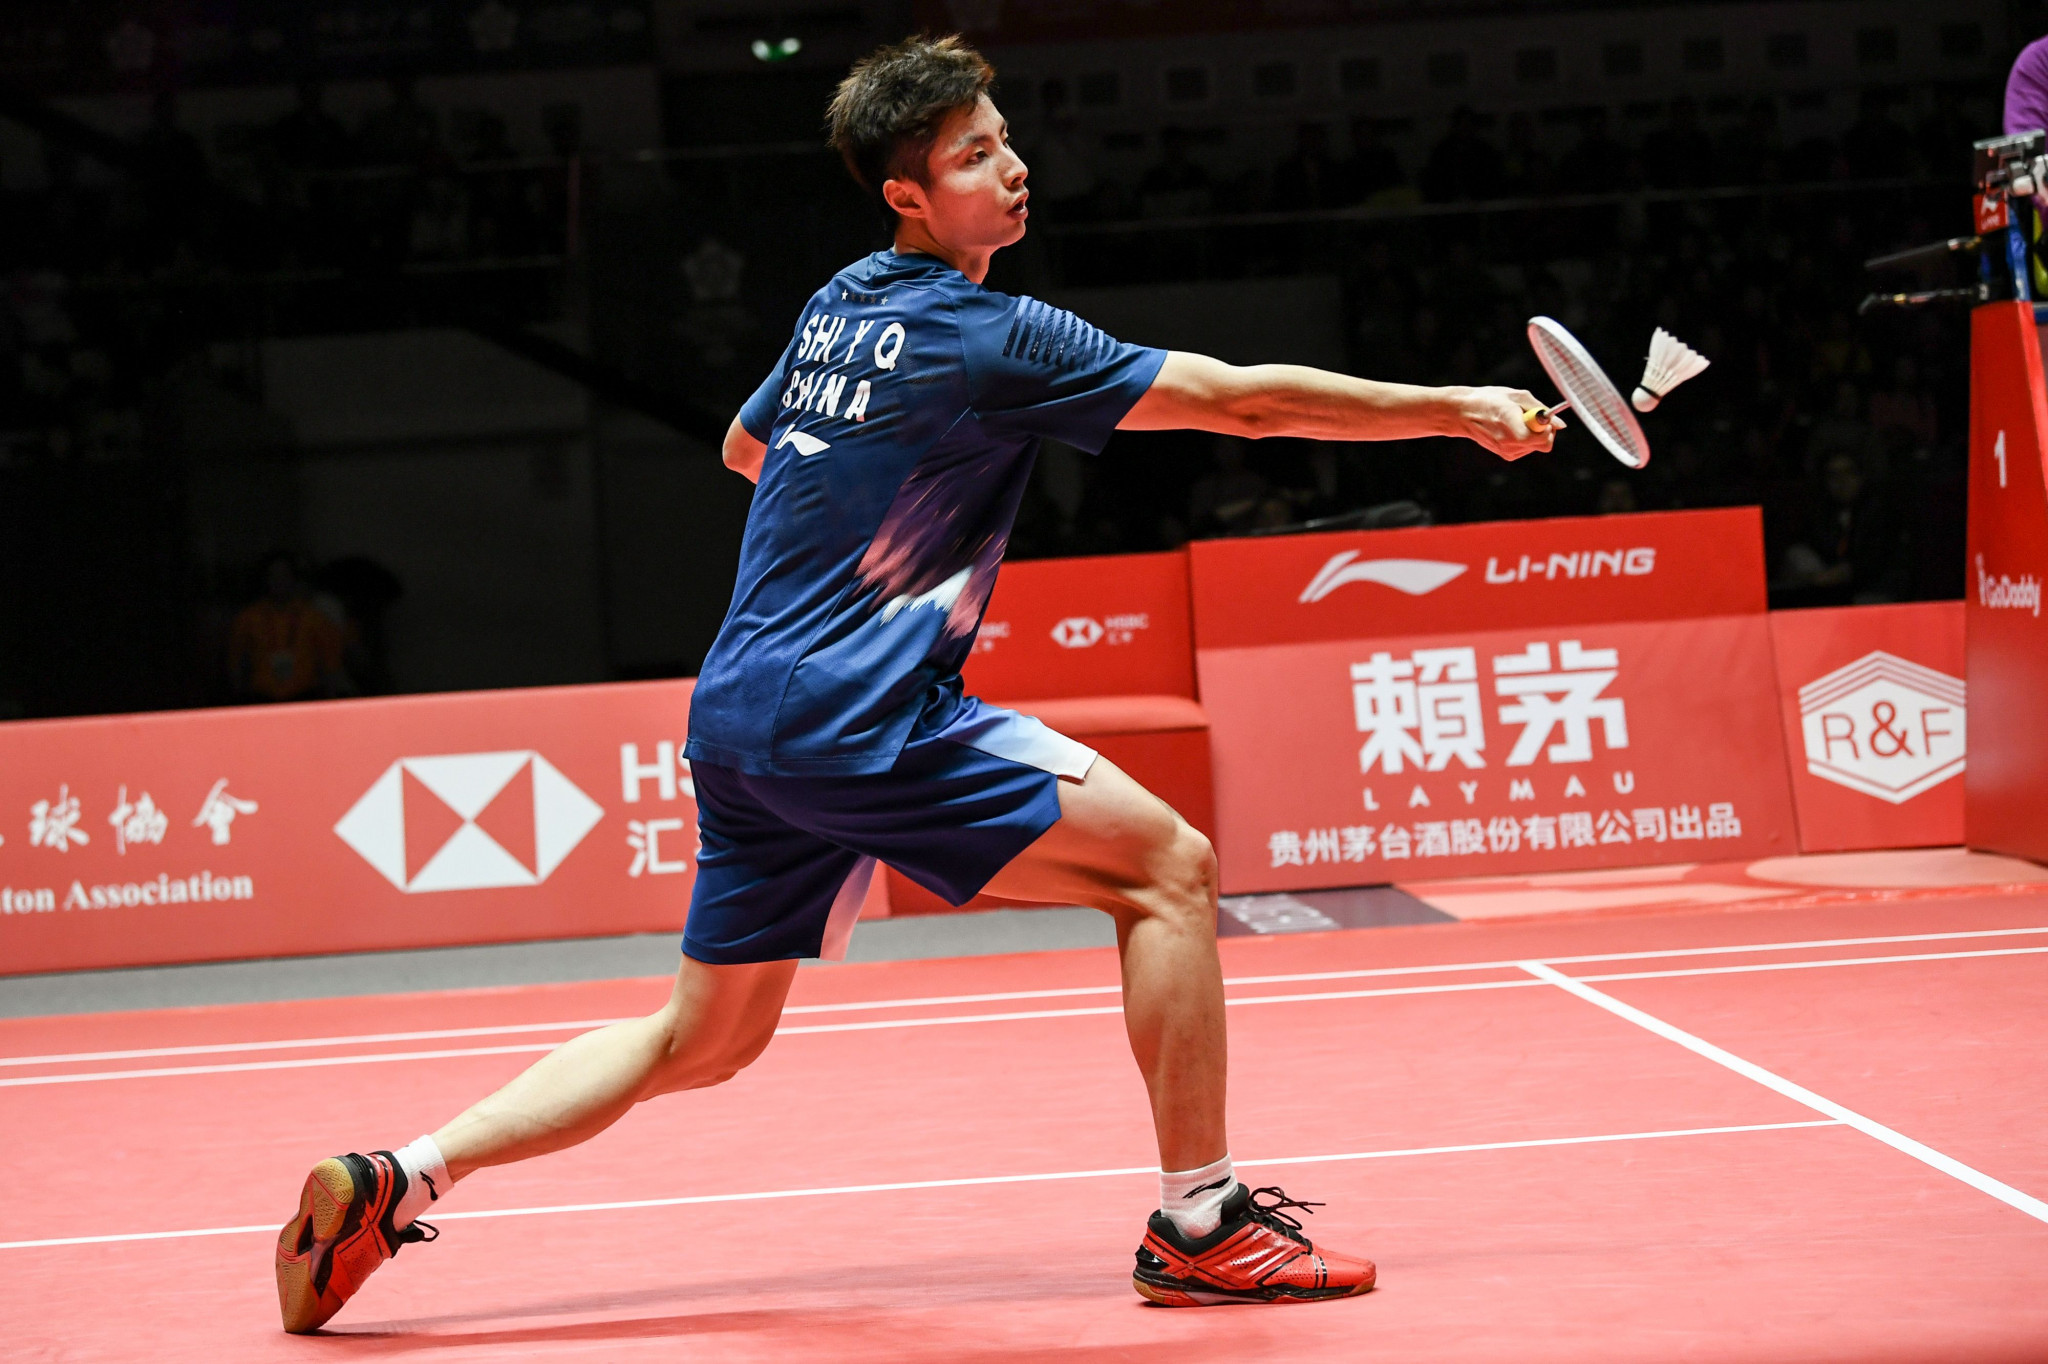 Former champion Shi knocked out of BWF Indonesia Masters by home favourite